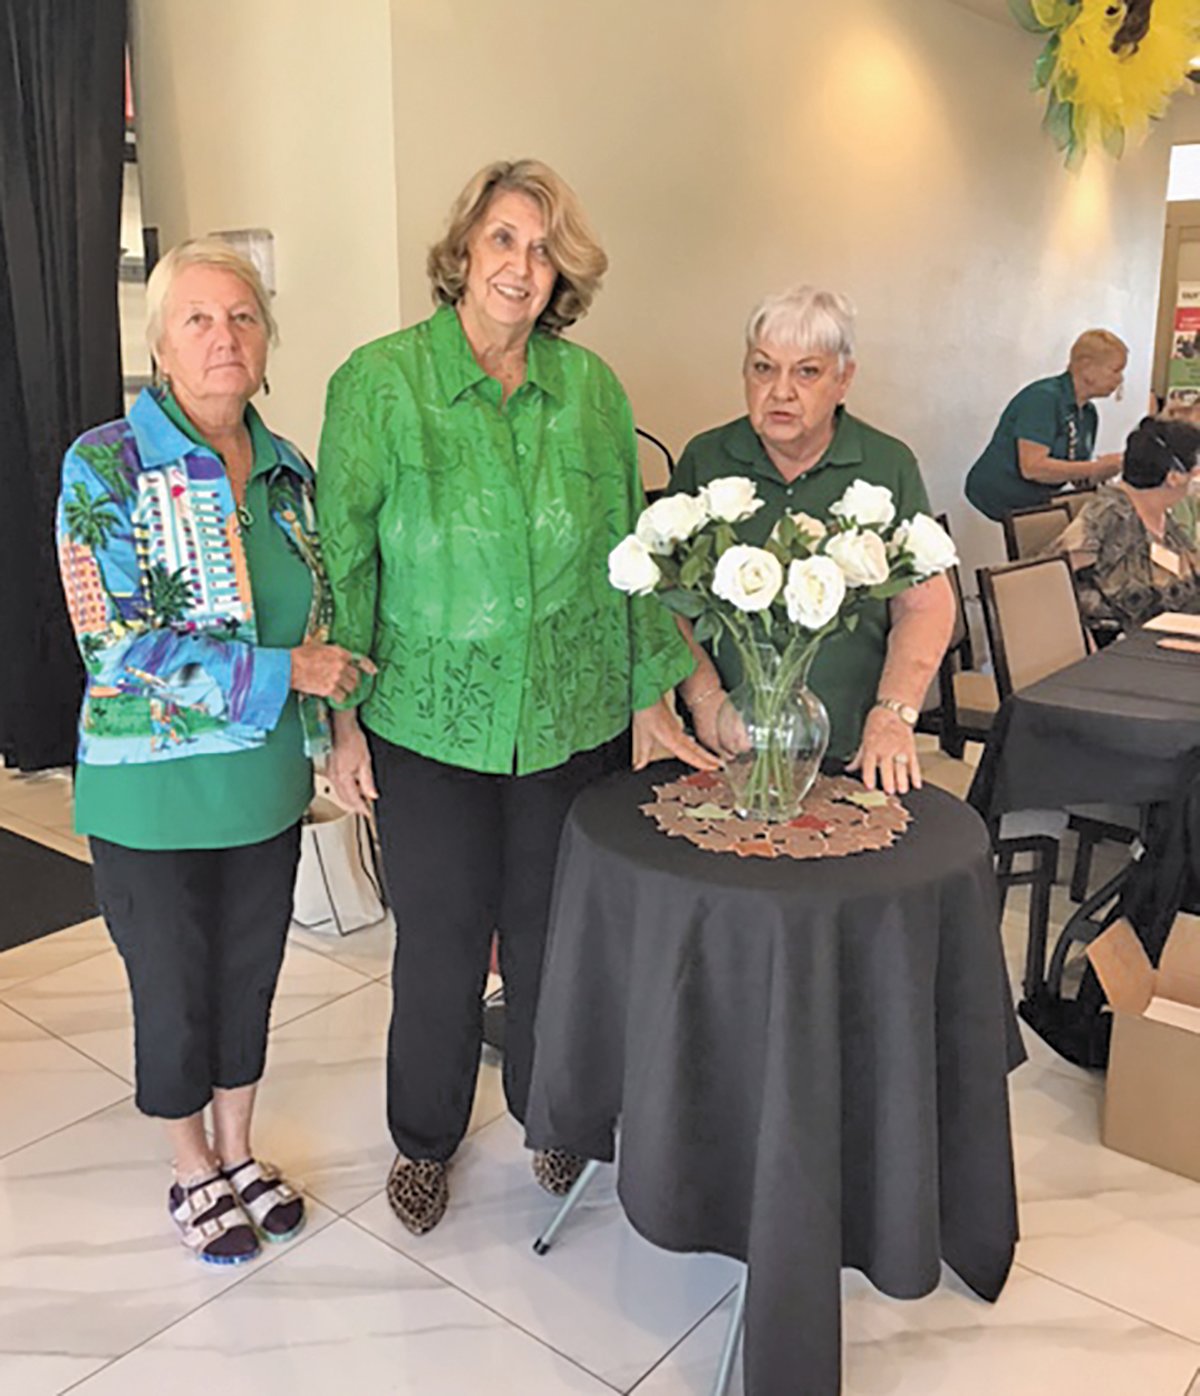 Three ladies from Green Thumb Garden Club of Clewiston attended the District X Fall Meeting. Pictured from left to right are Janet Summerlin, Karen Cockrane, and Carol Griggs.